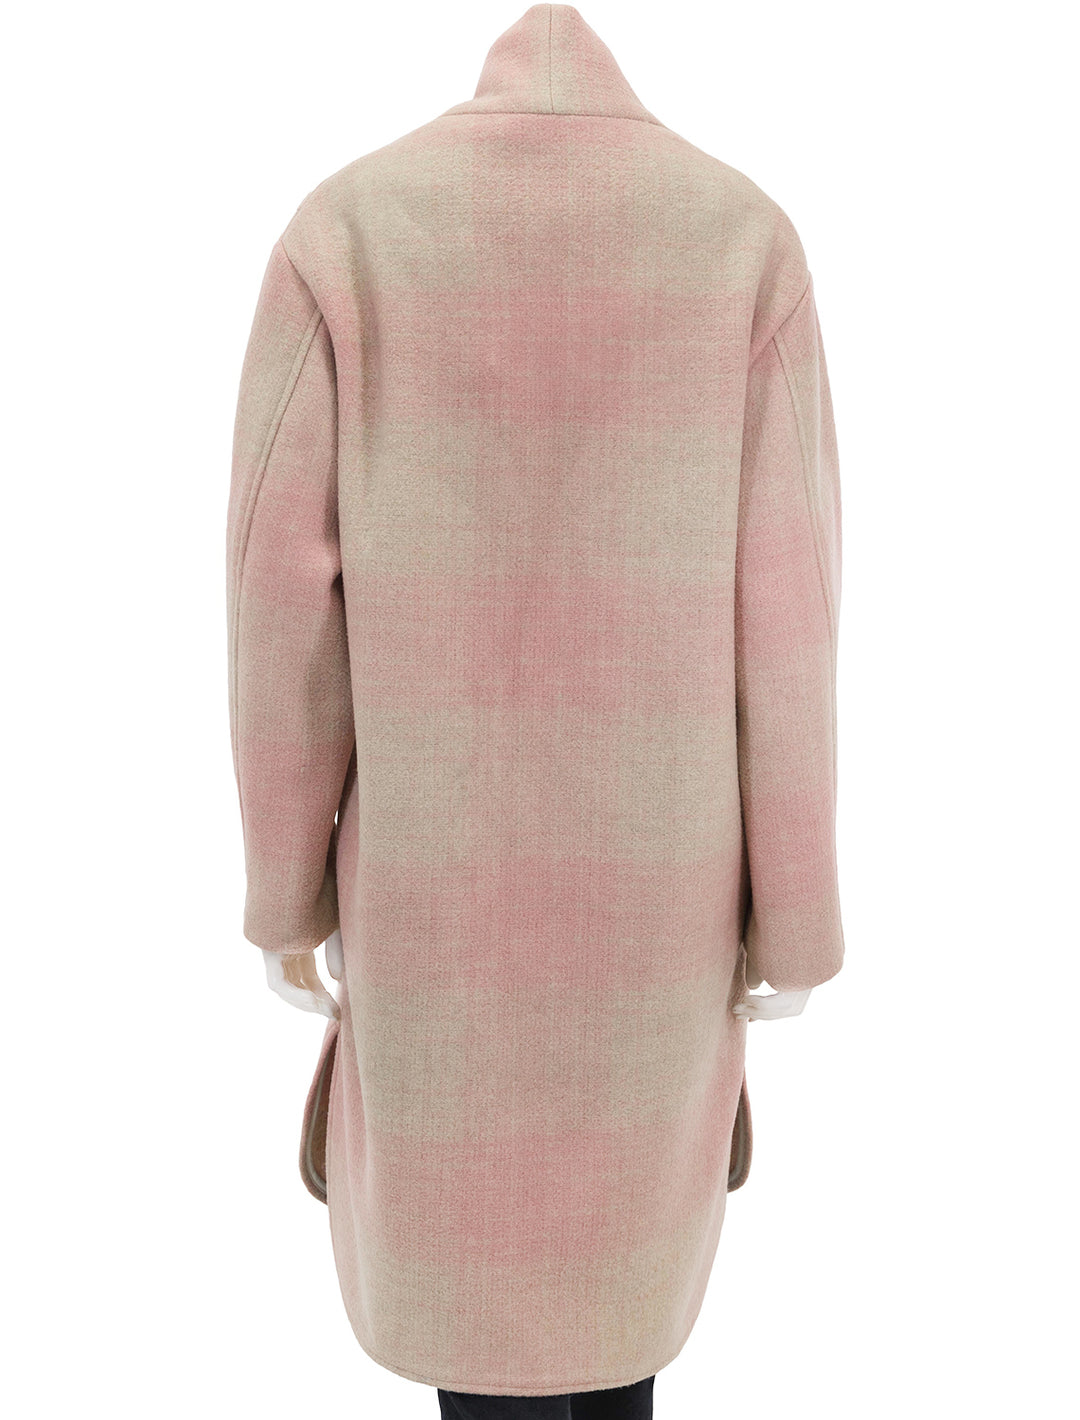 Back view of Isabel Marant Etoile's Gabriel Coat in Light Pink.